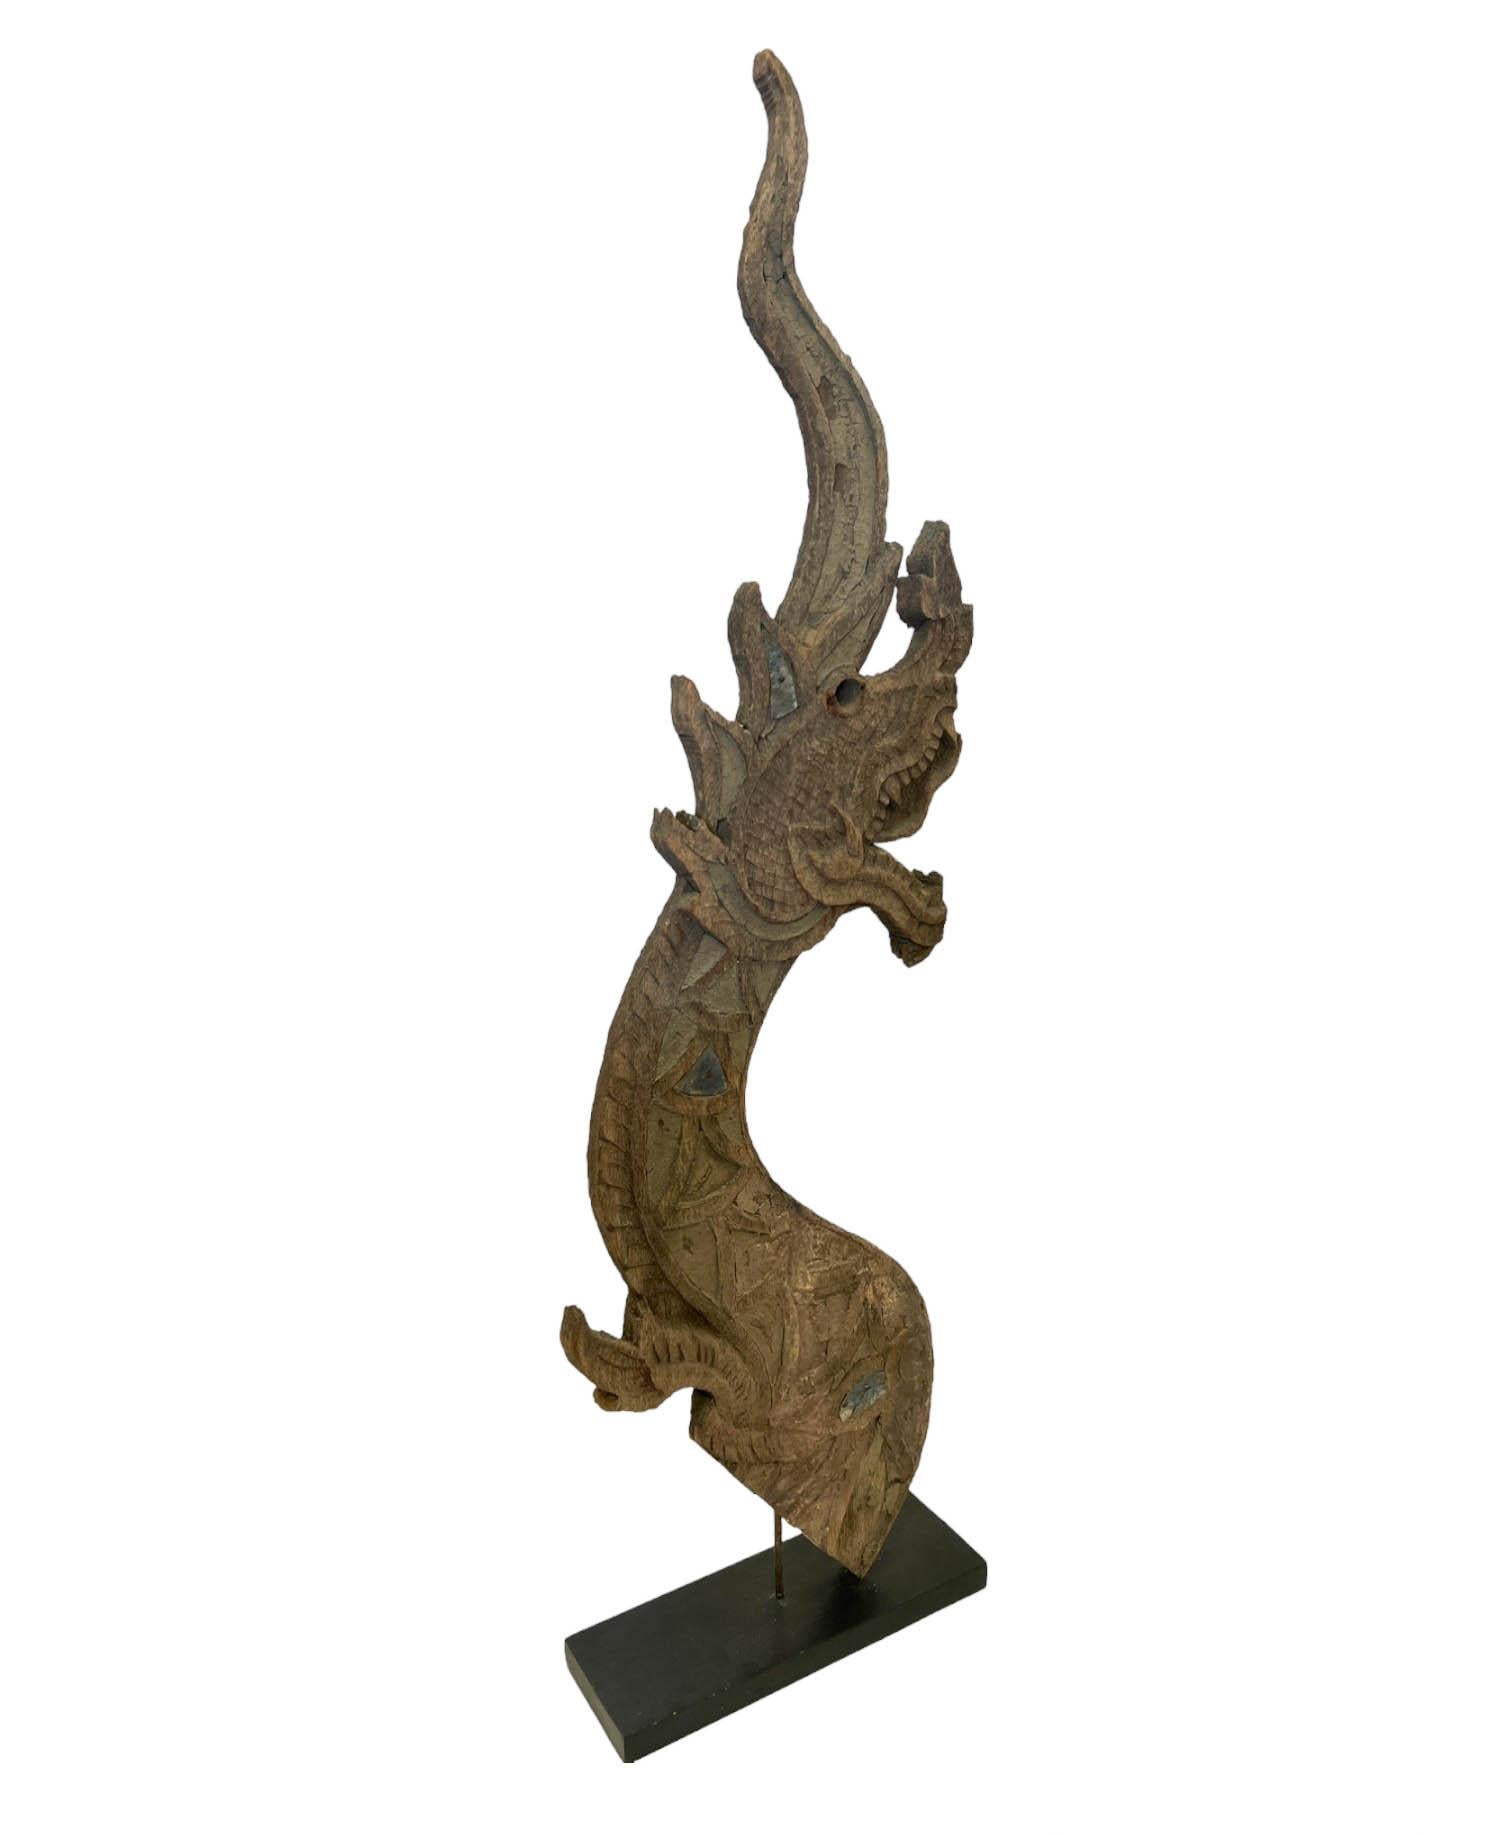 Crafted in Thailand with rich cultural significance, these temple roof finials known as naga hold profound spiritual symbolism. Traditionally used to guard against malevolent forces and natural calamities, these revered sculptures are steeped in